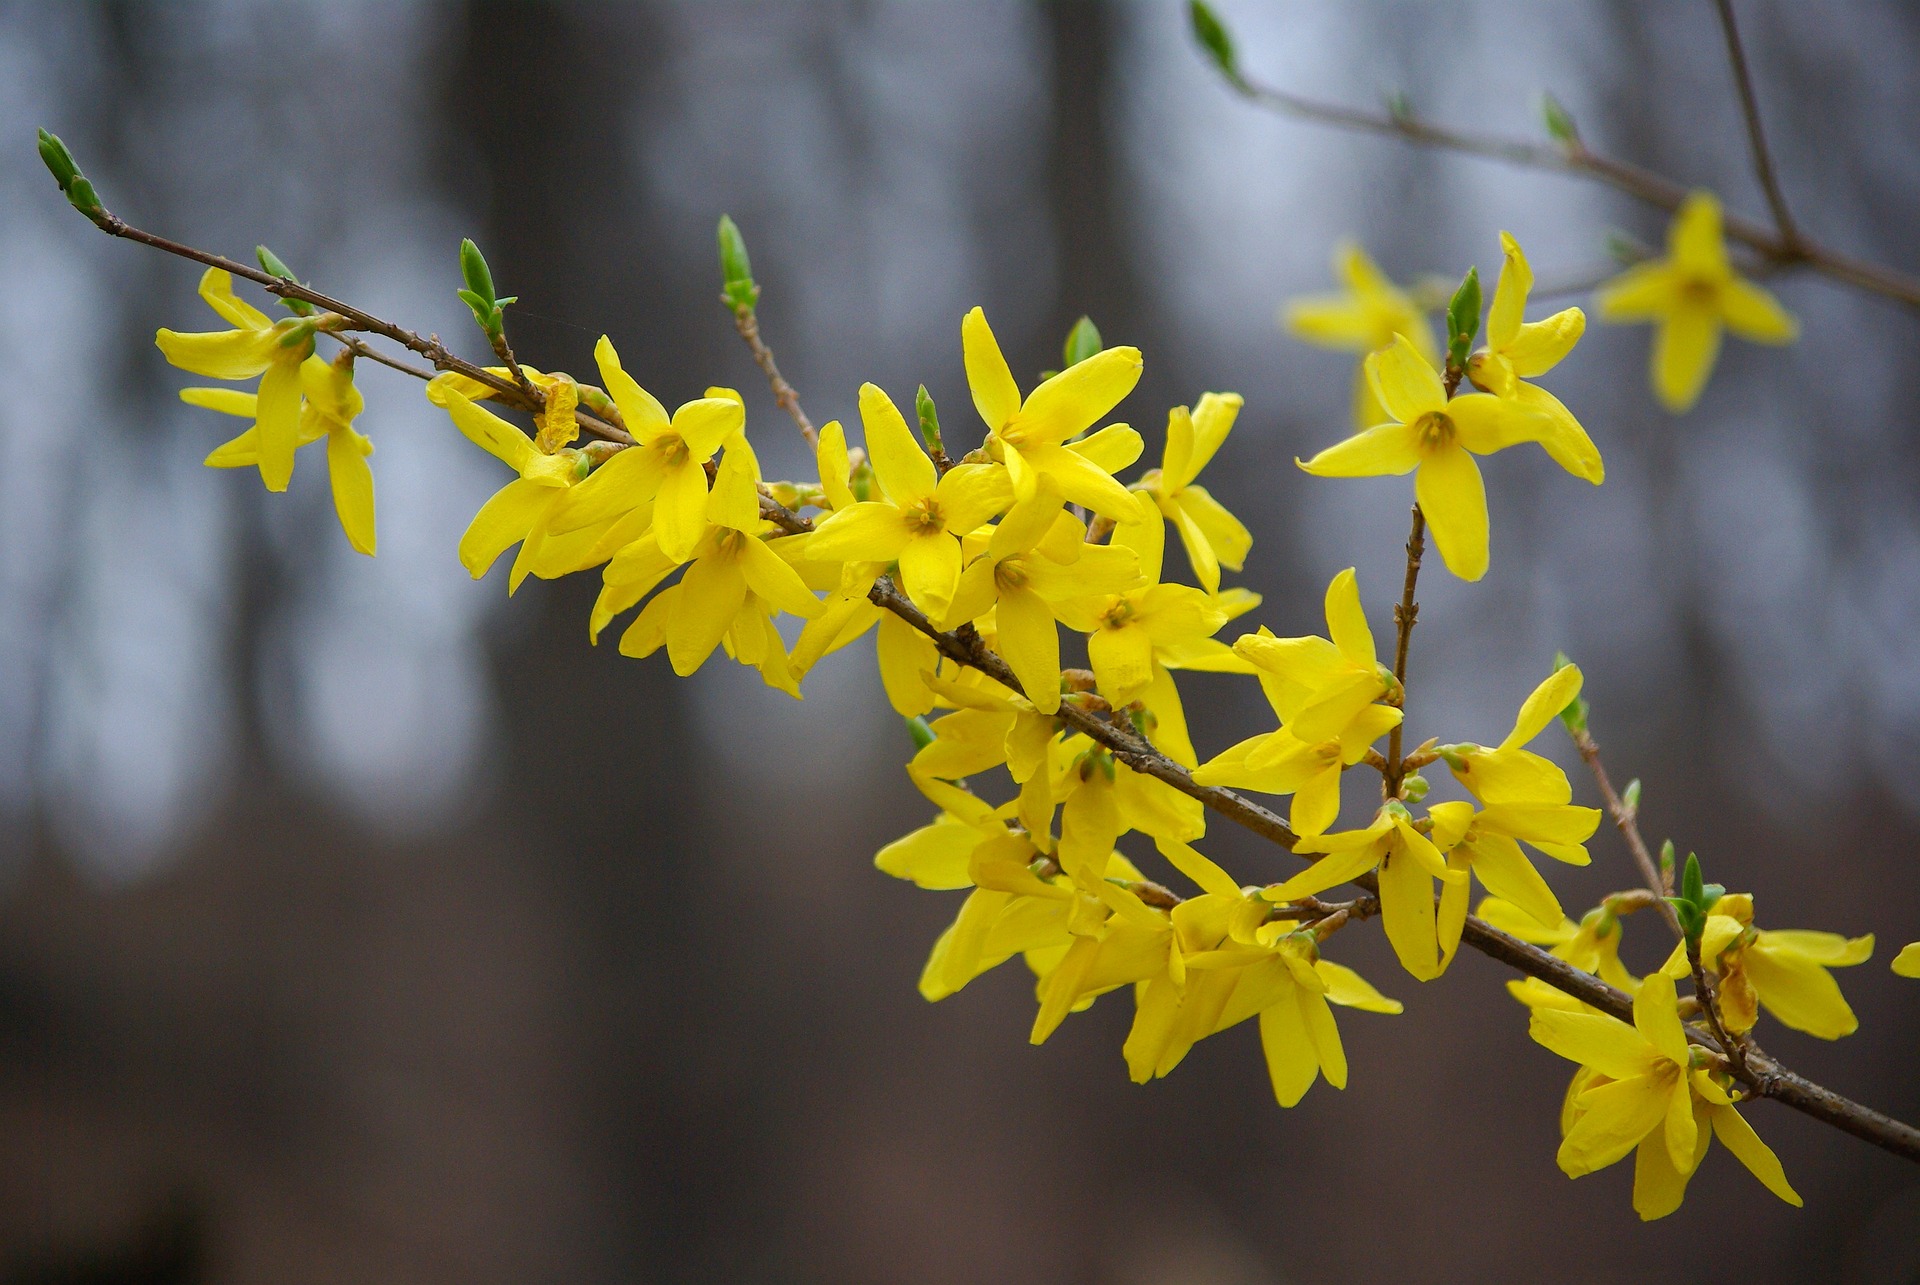 Forsythia branch with yellow flower blooms on it